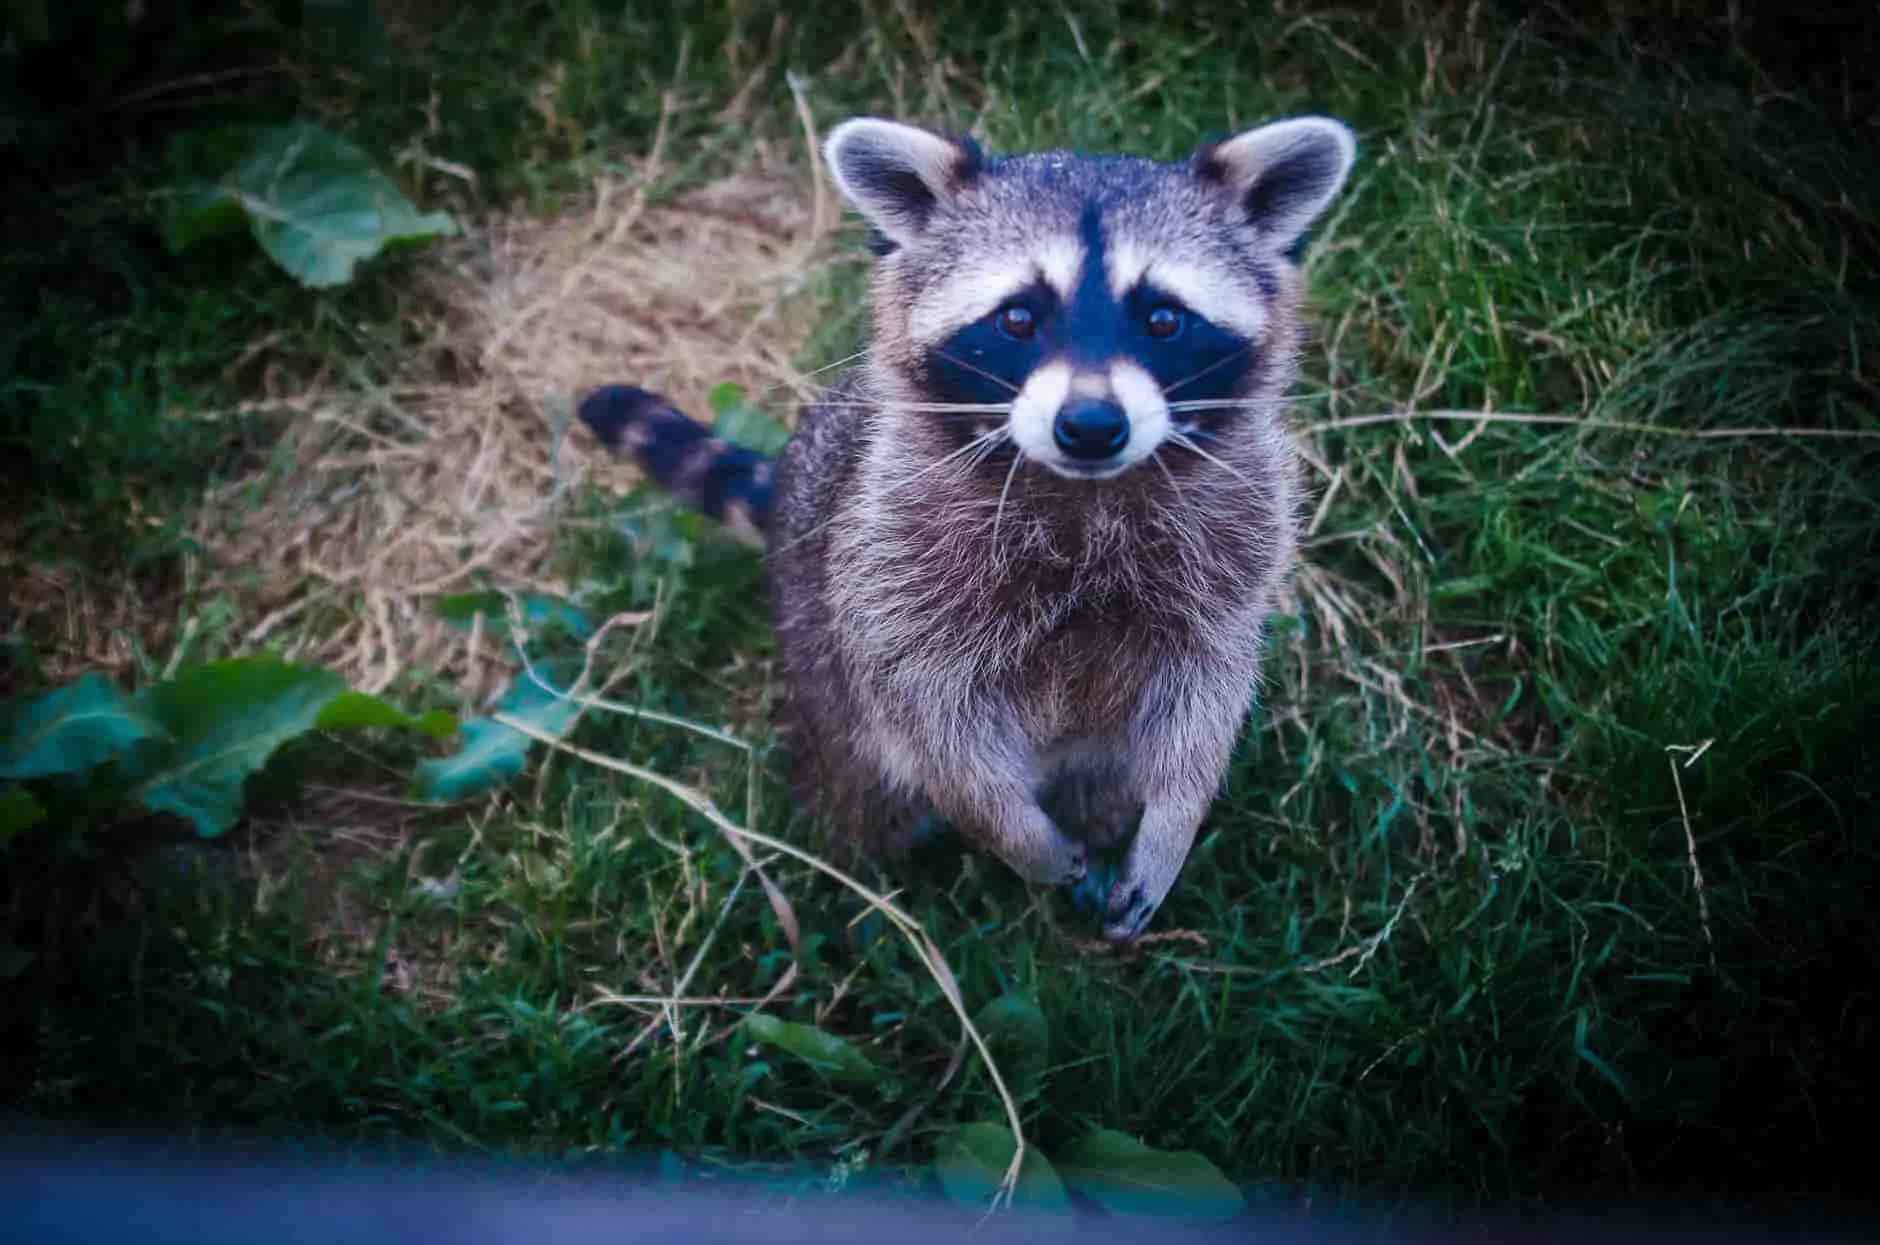 Rocket Raccoon from the MCU movies was inspired by a real-life Raccoon